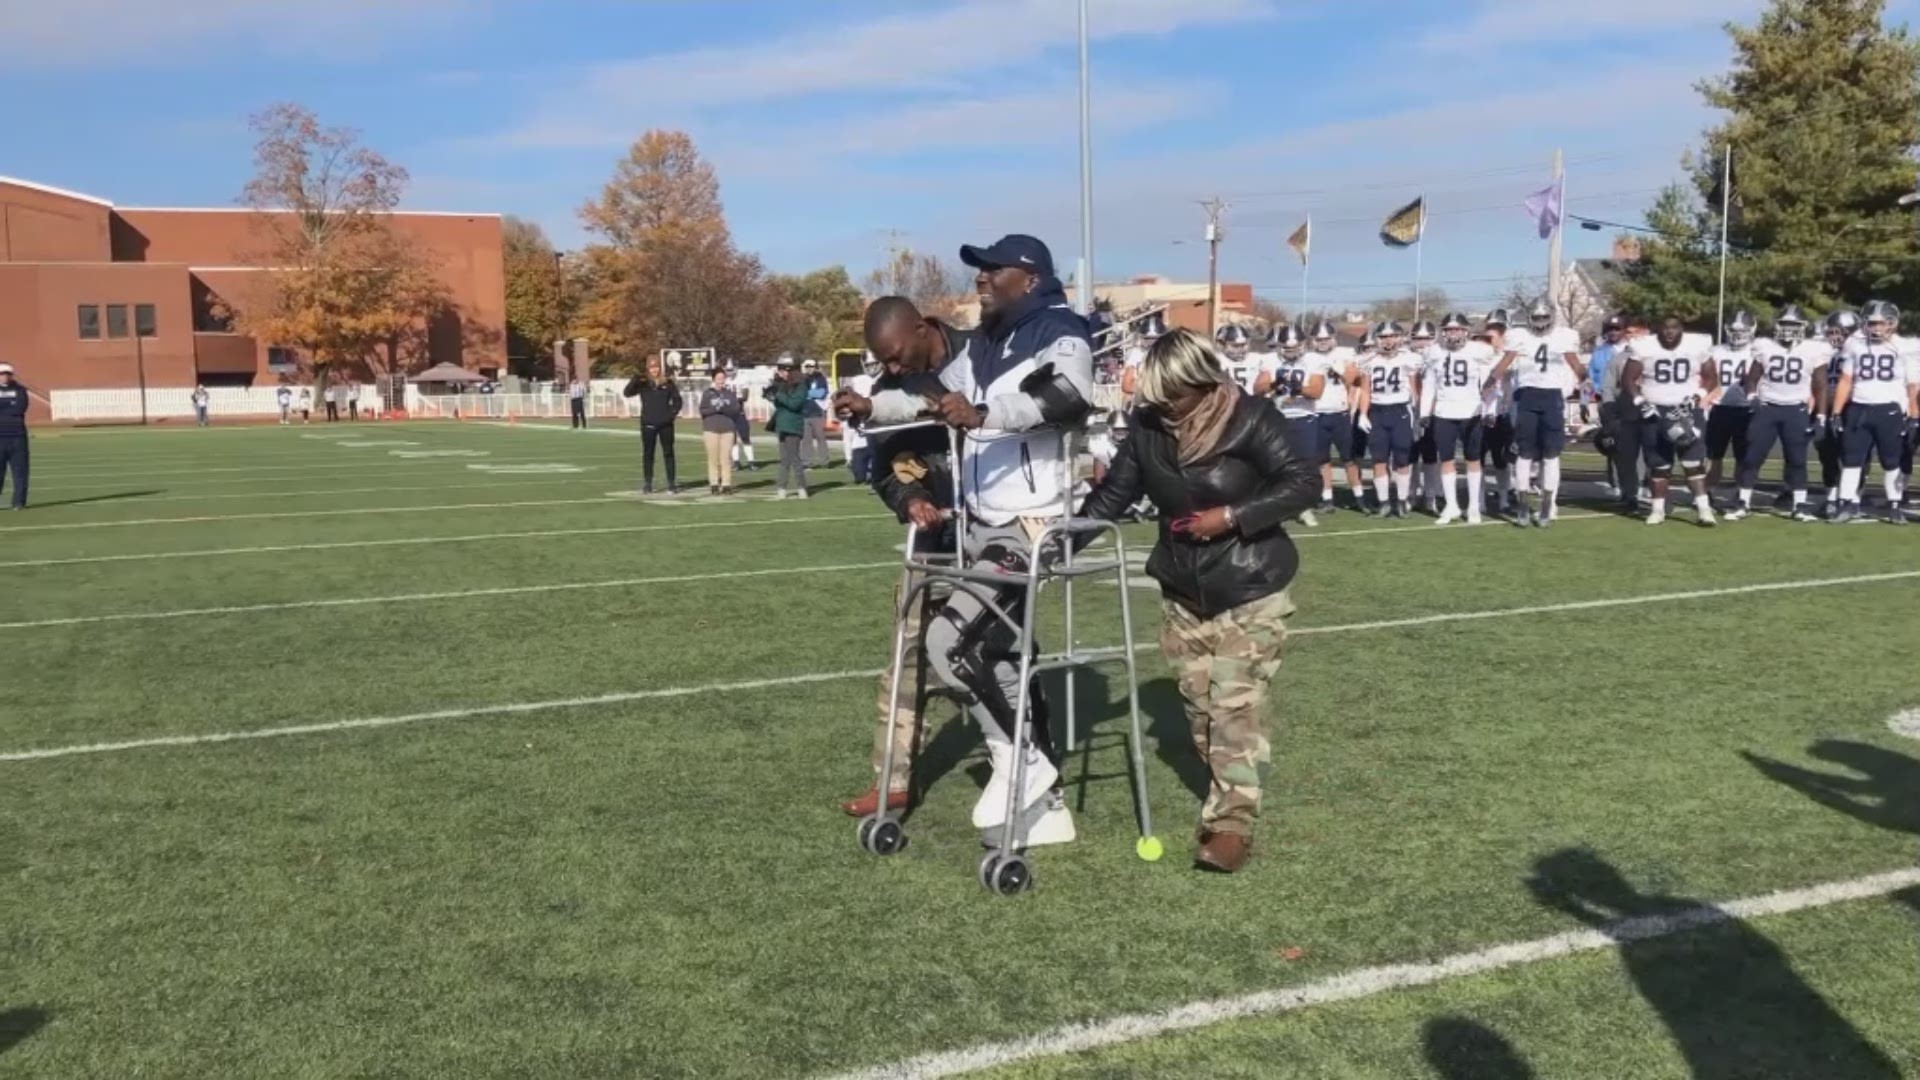 Justus Edwards, a defensive back from Berry College, who was told he likely wouldn't be able to walk again after an injury, walked onto the field on Sat., Nov. 9.